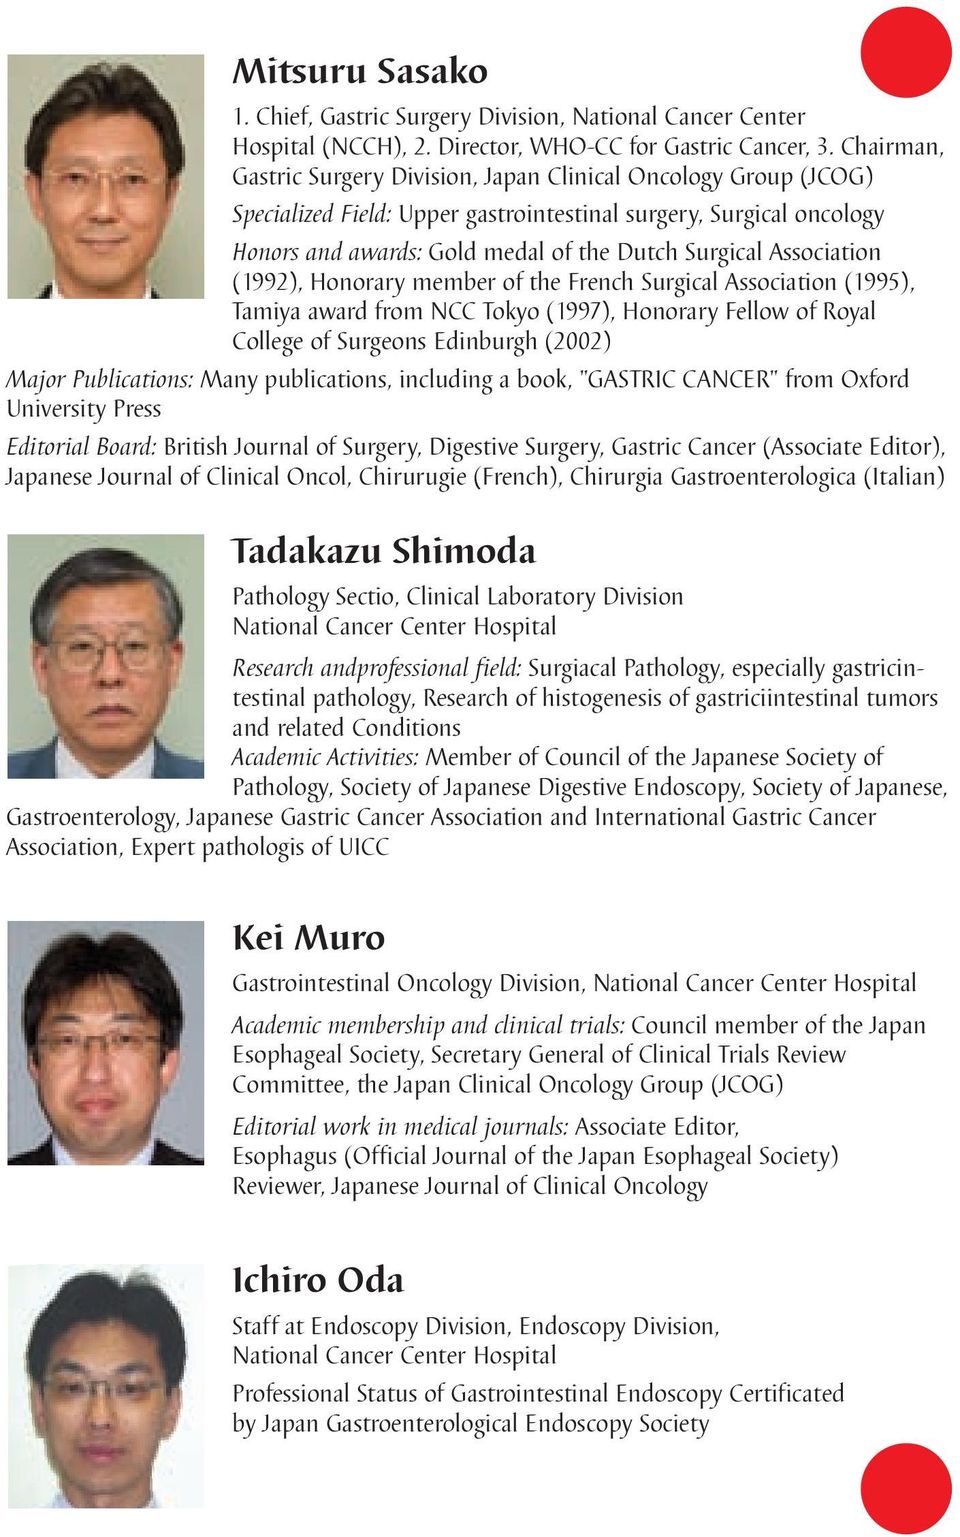 Association (1992), Honorary member of the French Surgical Association (1995), Tamiya award from NCC Tokyo (1997), Honorary Fellow of Royal College of Surgeons Edinburgh (2002) Major Publications: